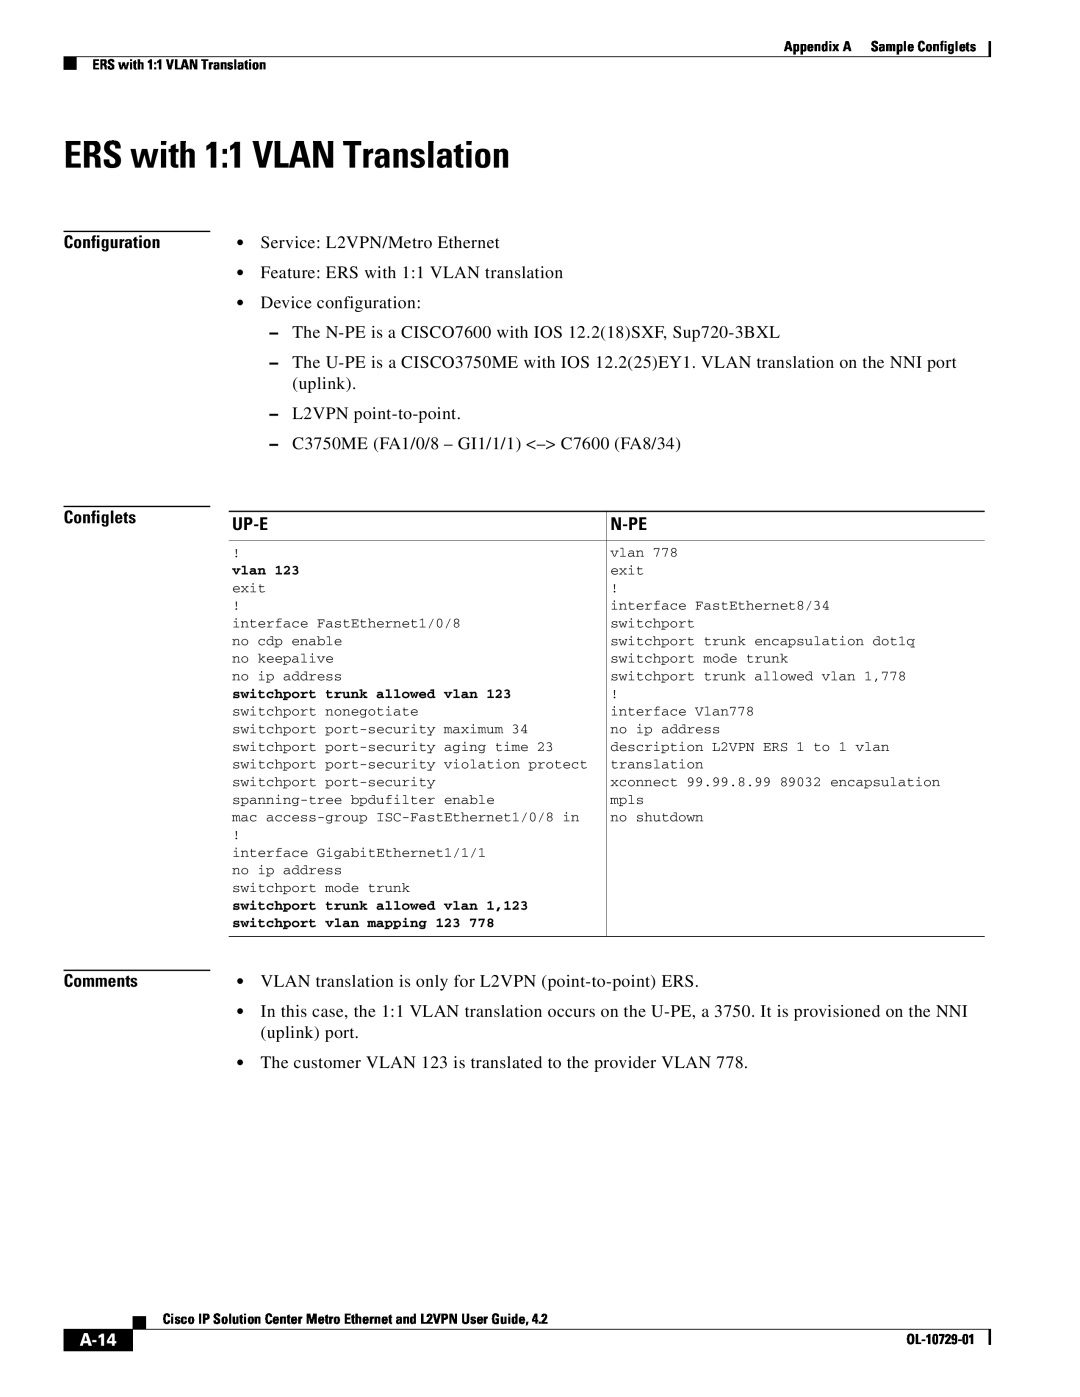 Cisco Systems OL-10729-01 appendix ERS with 11 VLAN Translation, A-14, Configuration Configlets, Up-E, N-Pe, Comments 